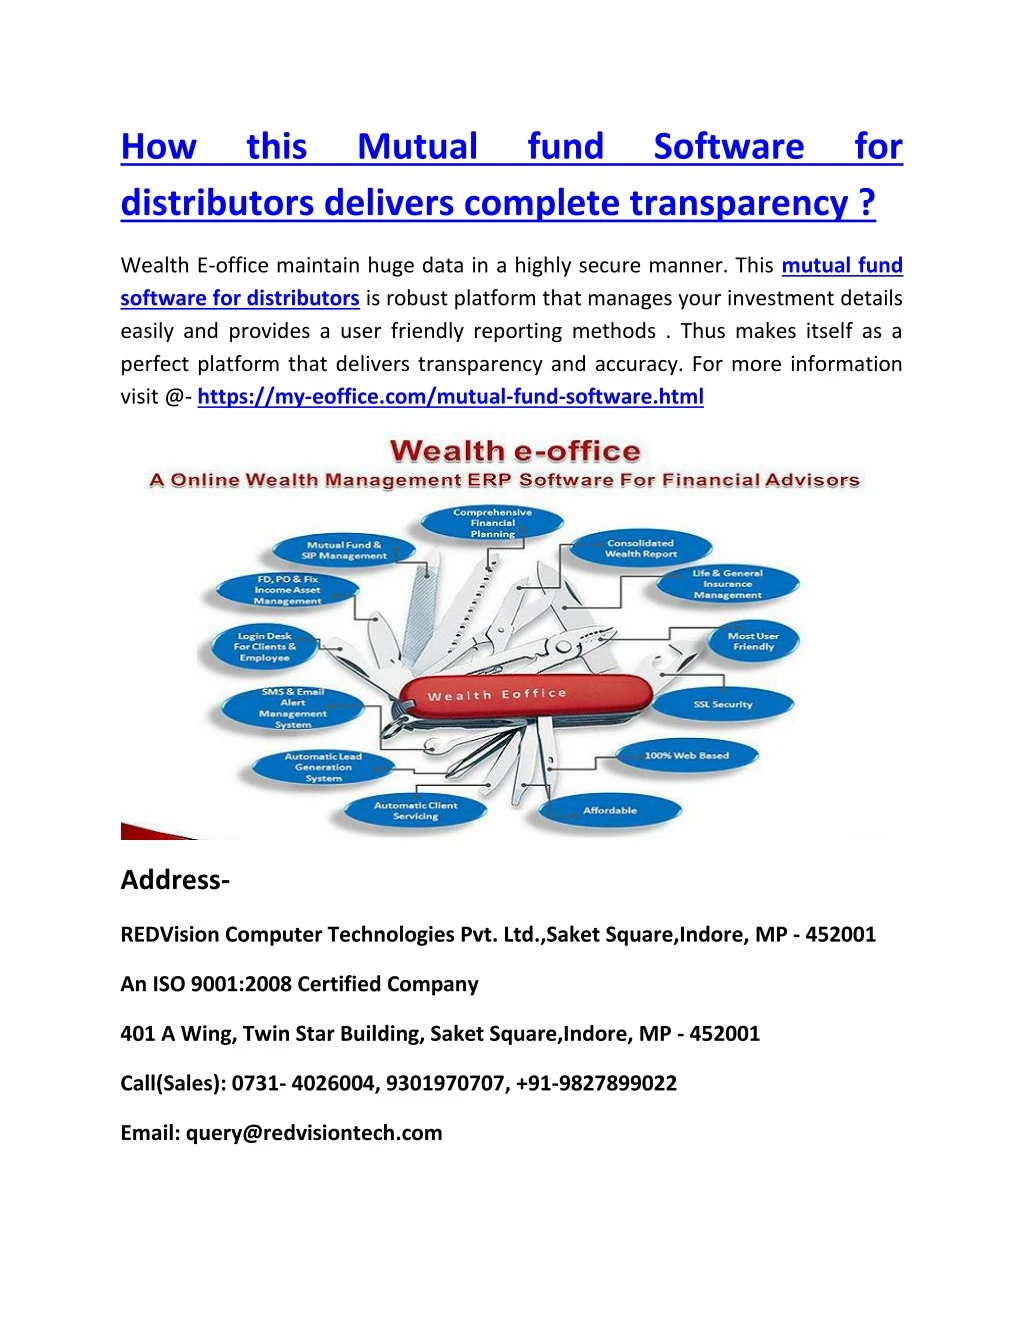 how distributors delivers complete transparency